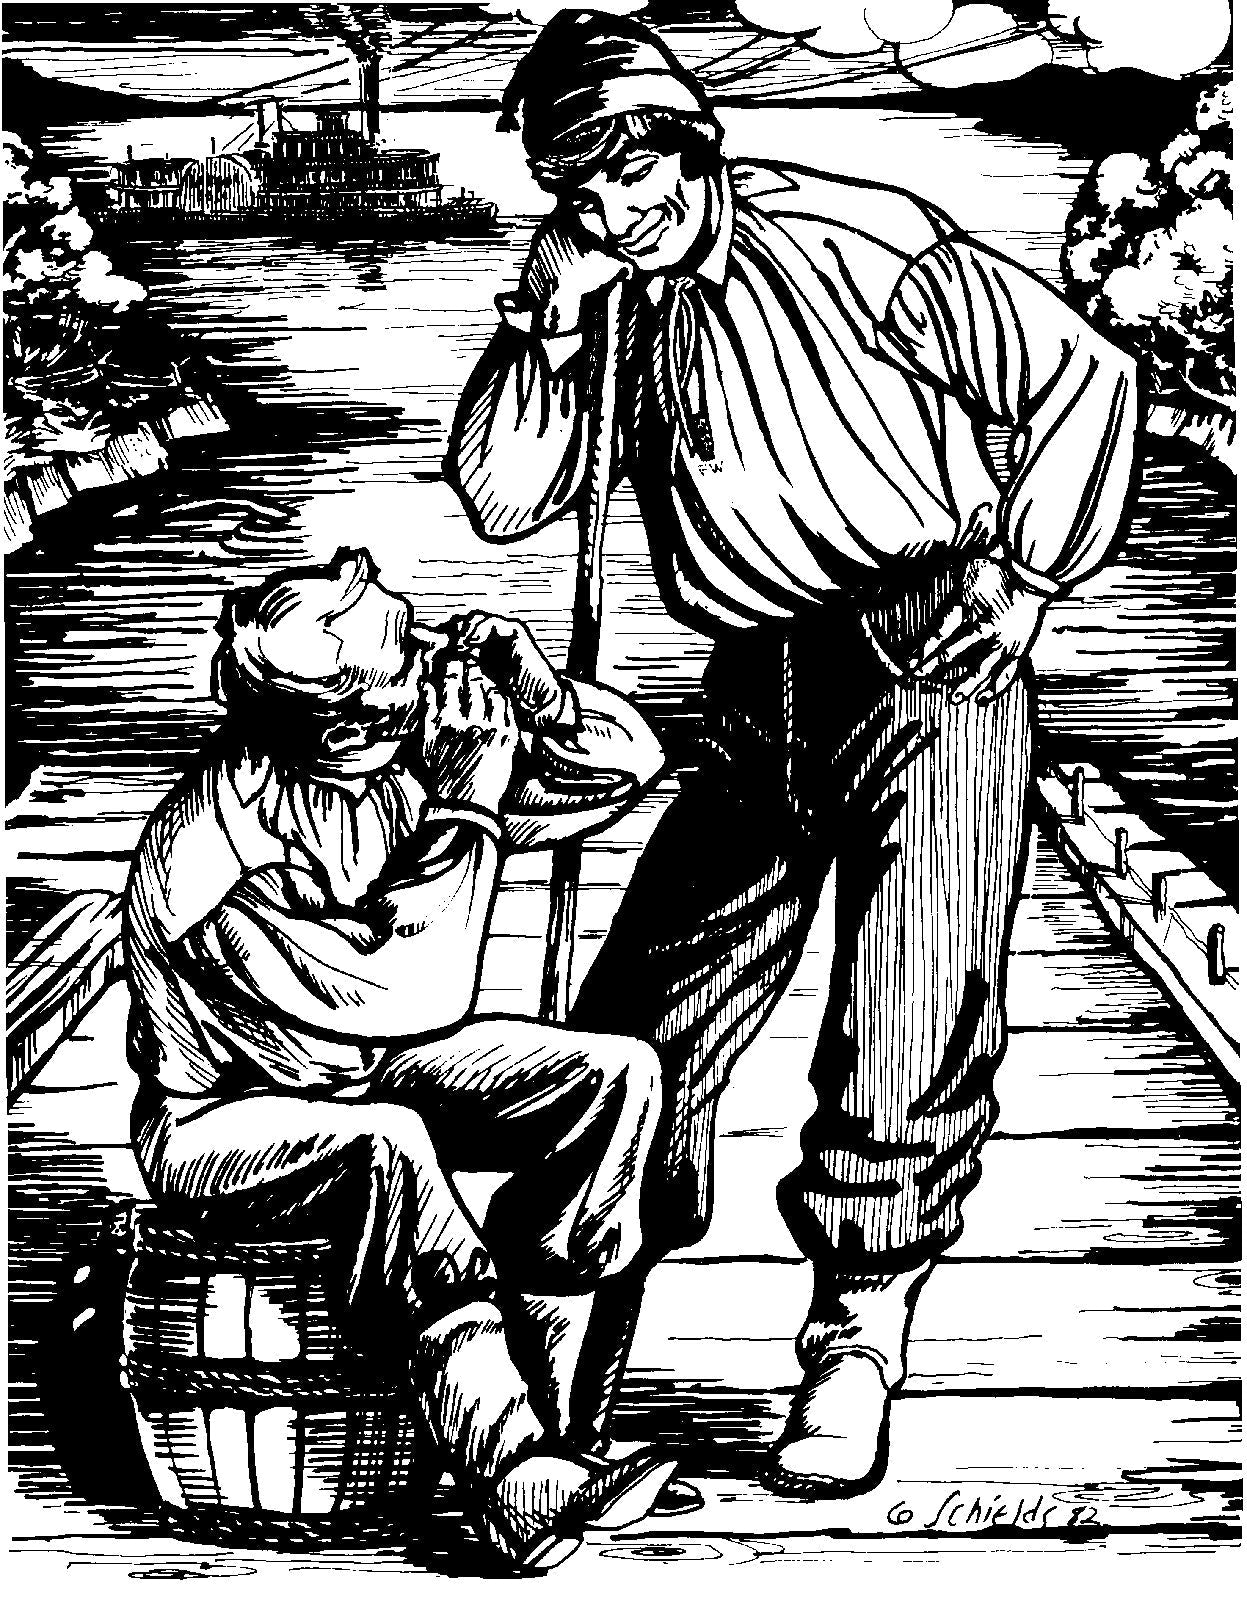 Black and white pen and ink drawing of two men on a dock, one sitting on a barrel the other standing leaning on a walking stick.  